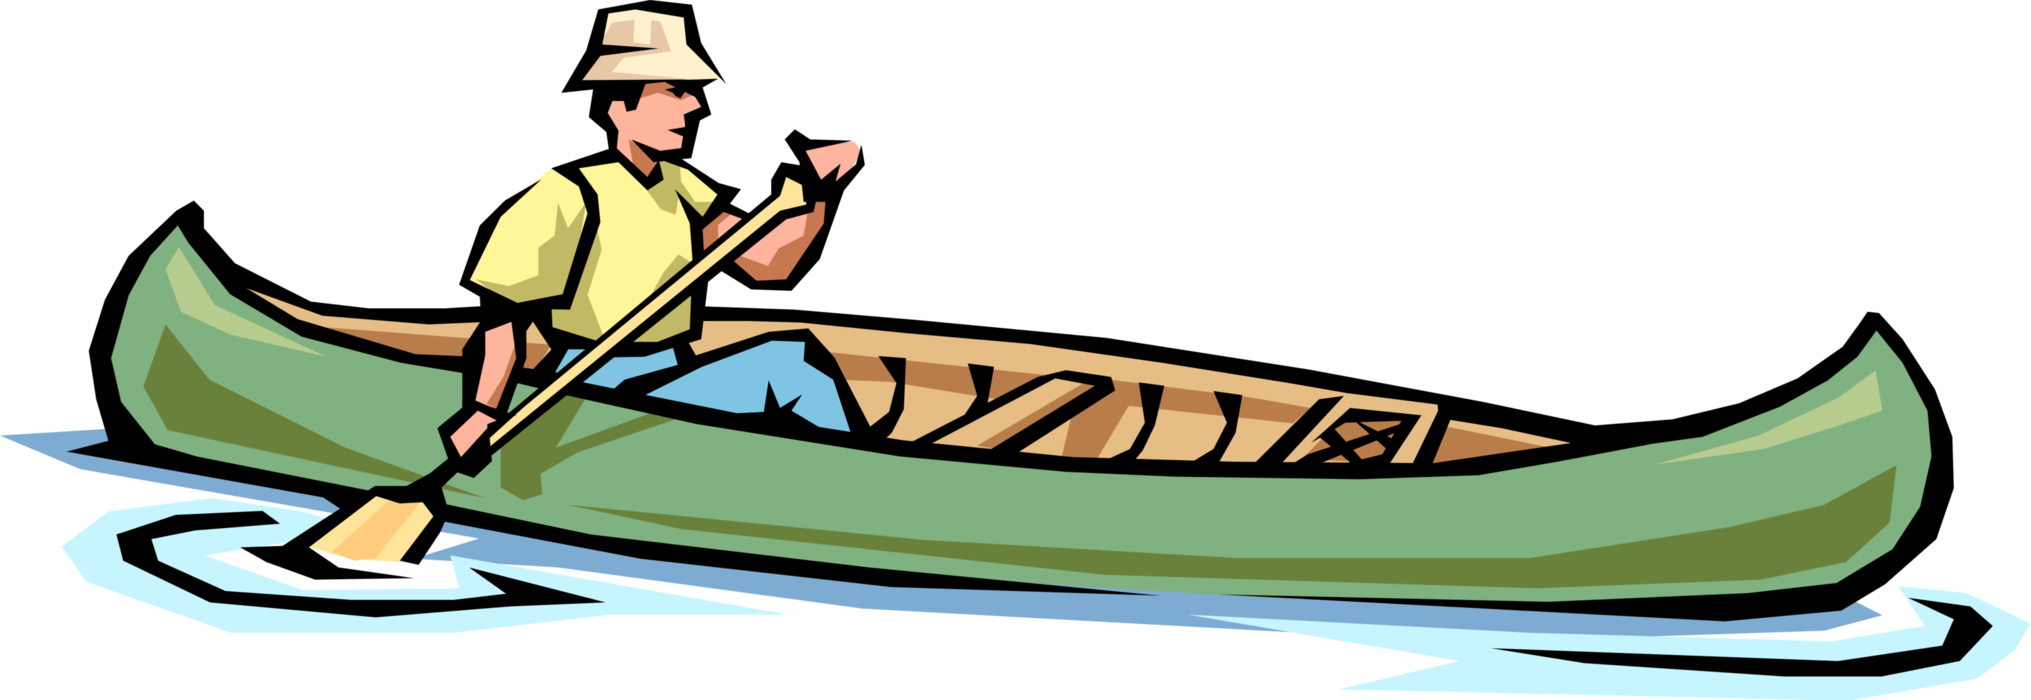 Vector Illustration of Canoeist in Canoe Paddles through Water in the Great Outdoors